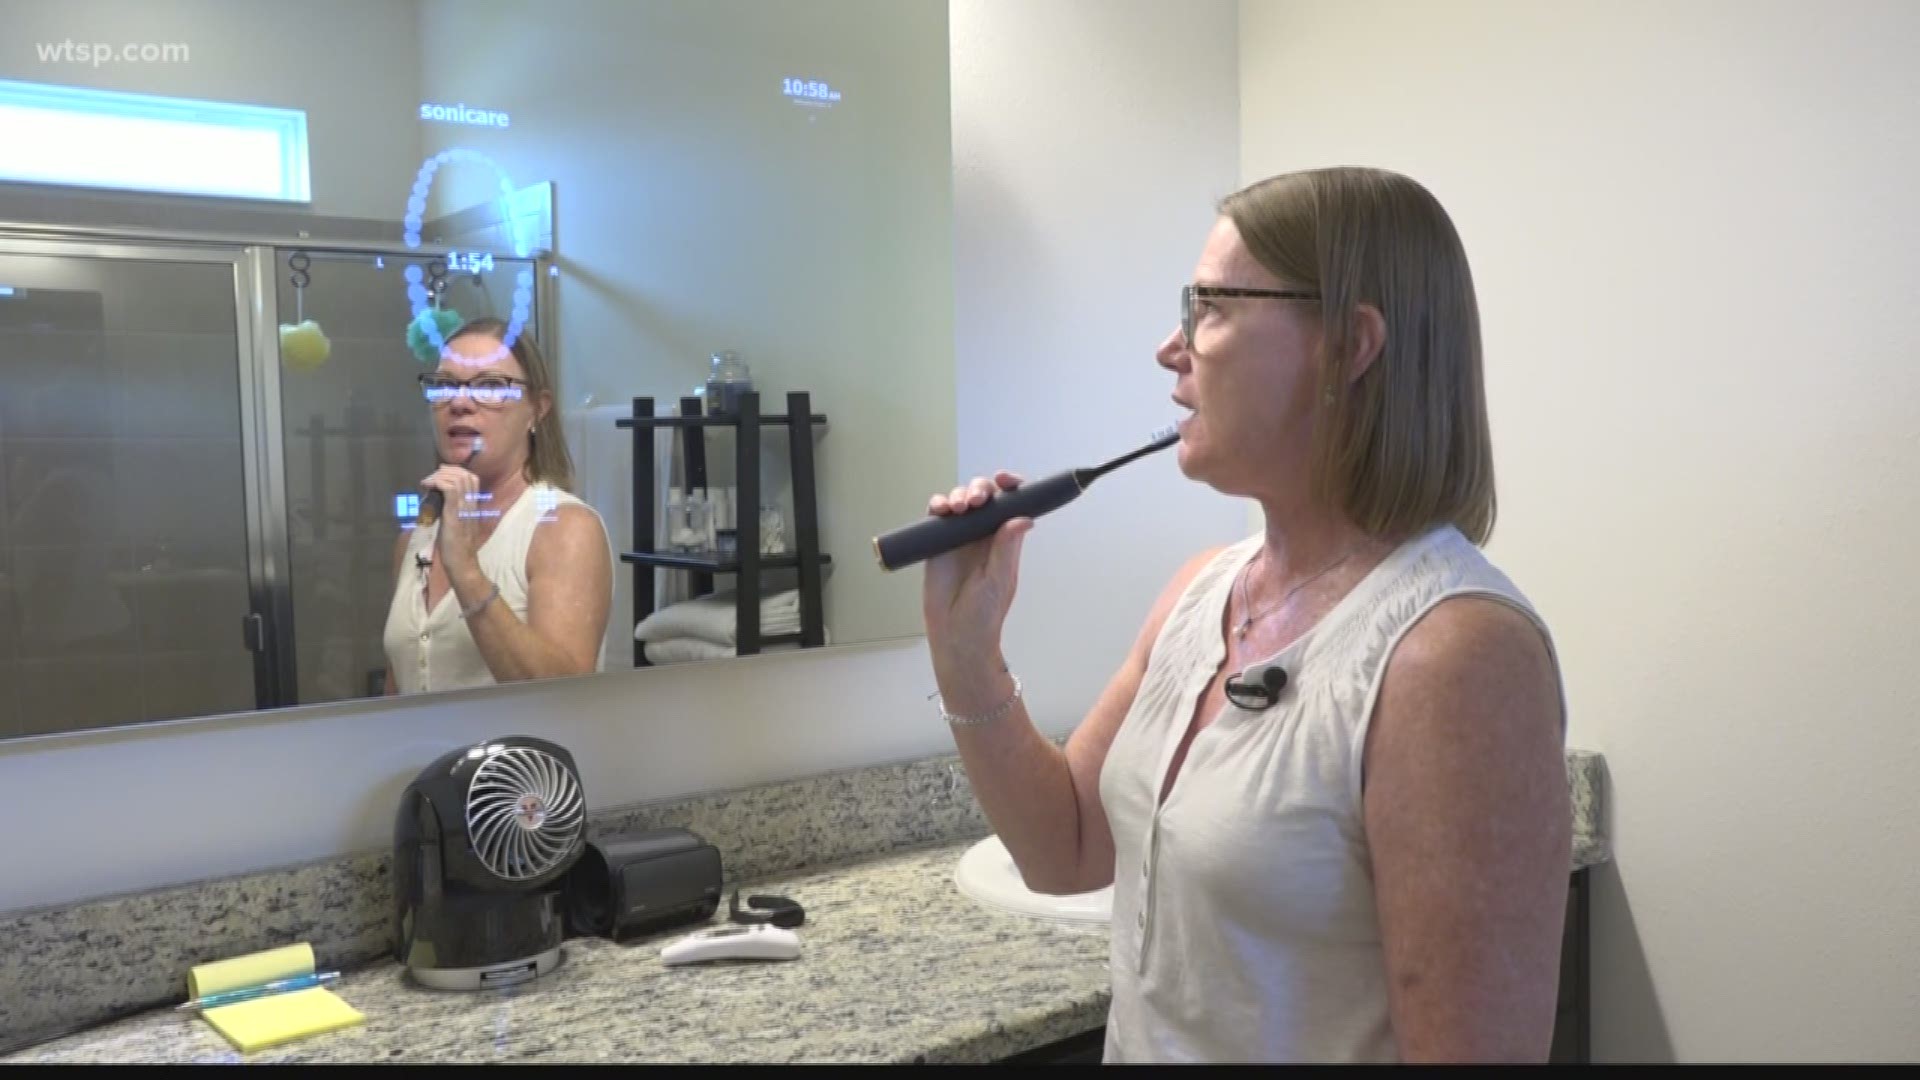 The 'smart mirror' guides teeth brushing, telling her how long to brush each quadrant of teeth, and if she missed a spot. https://bit.ly/2OPULnH